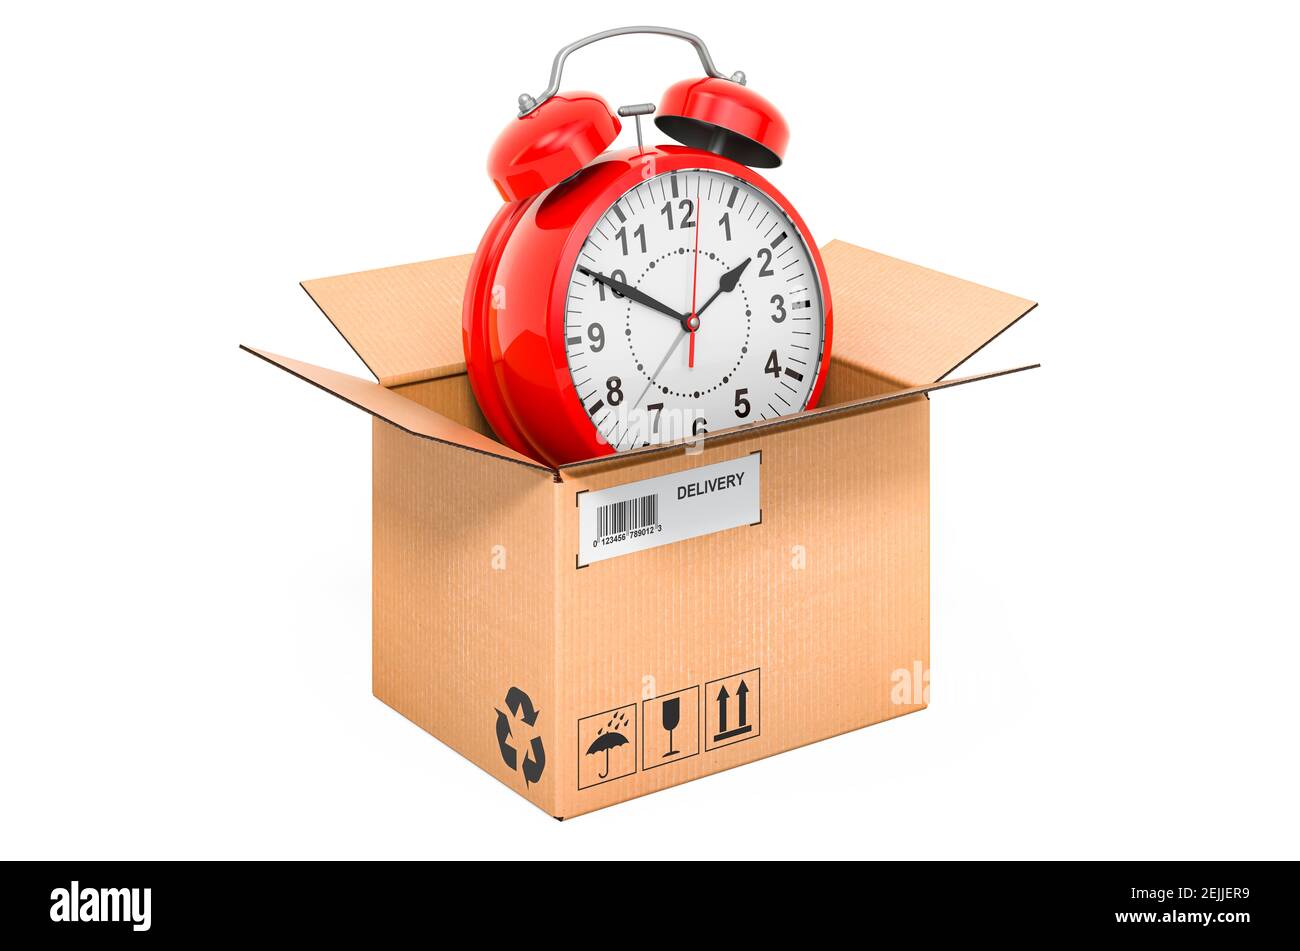 Alarm clock inside cardboard box, delivery concept. 3D rendering isolated on white background Stock Photo